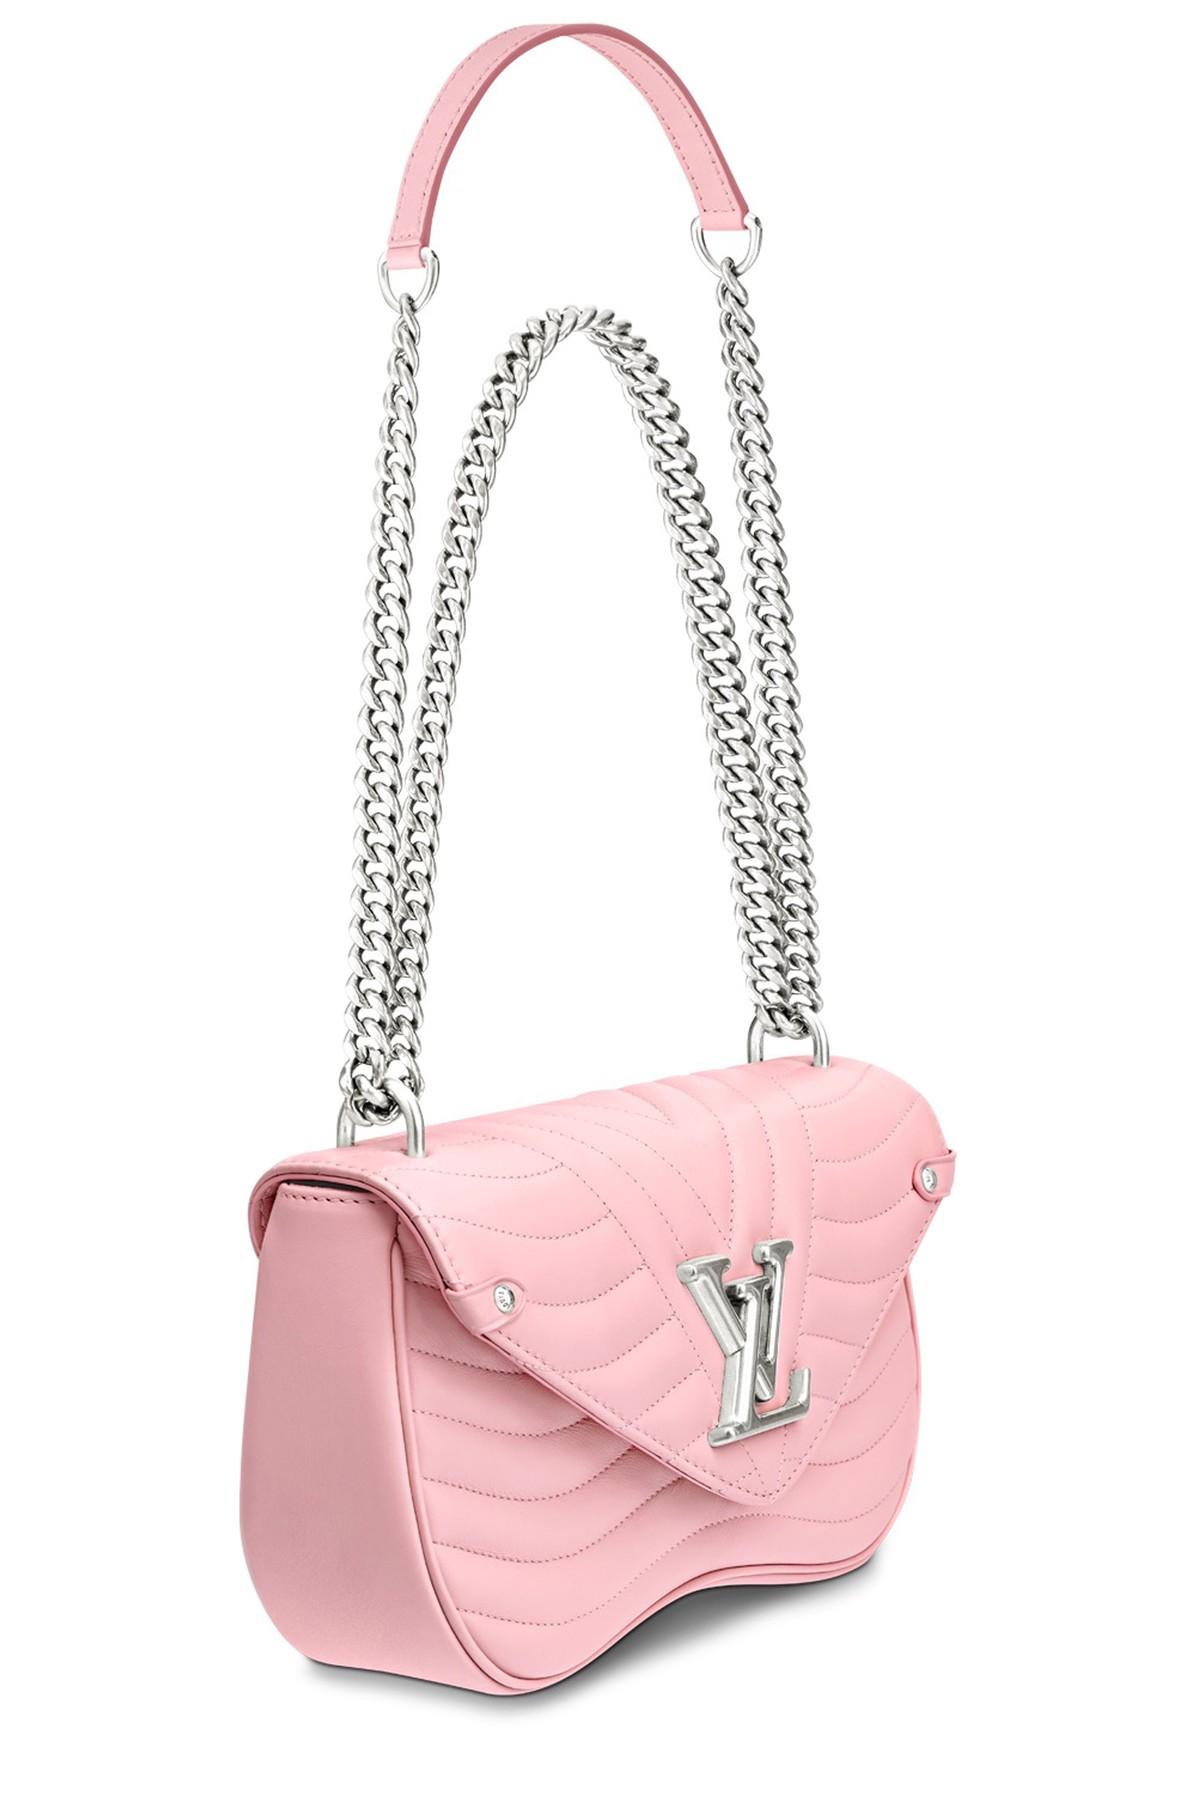 Louis Vuitton New Wave Camera Bag in Pink  Hebster Boutique